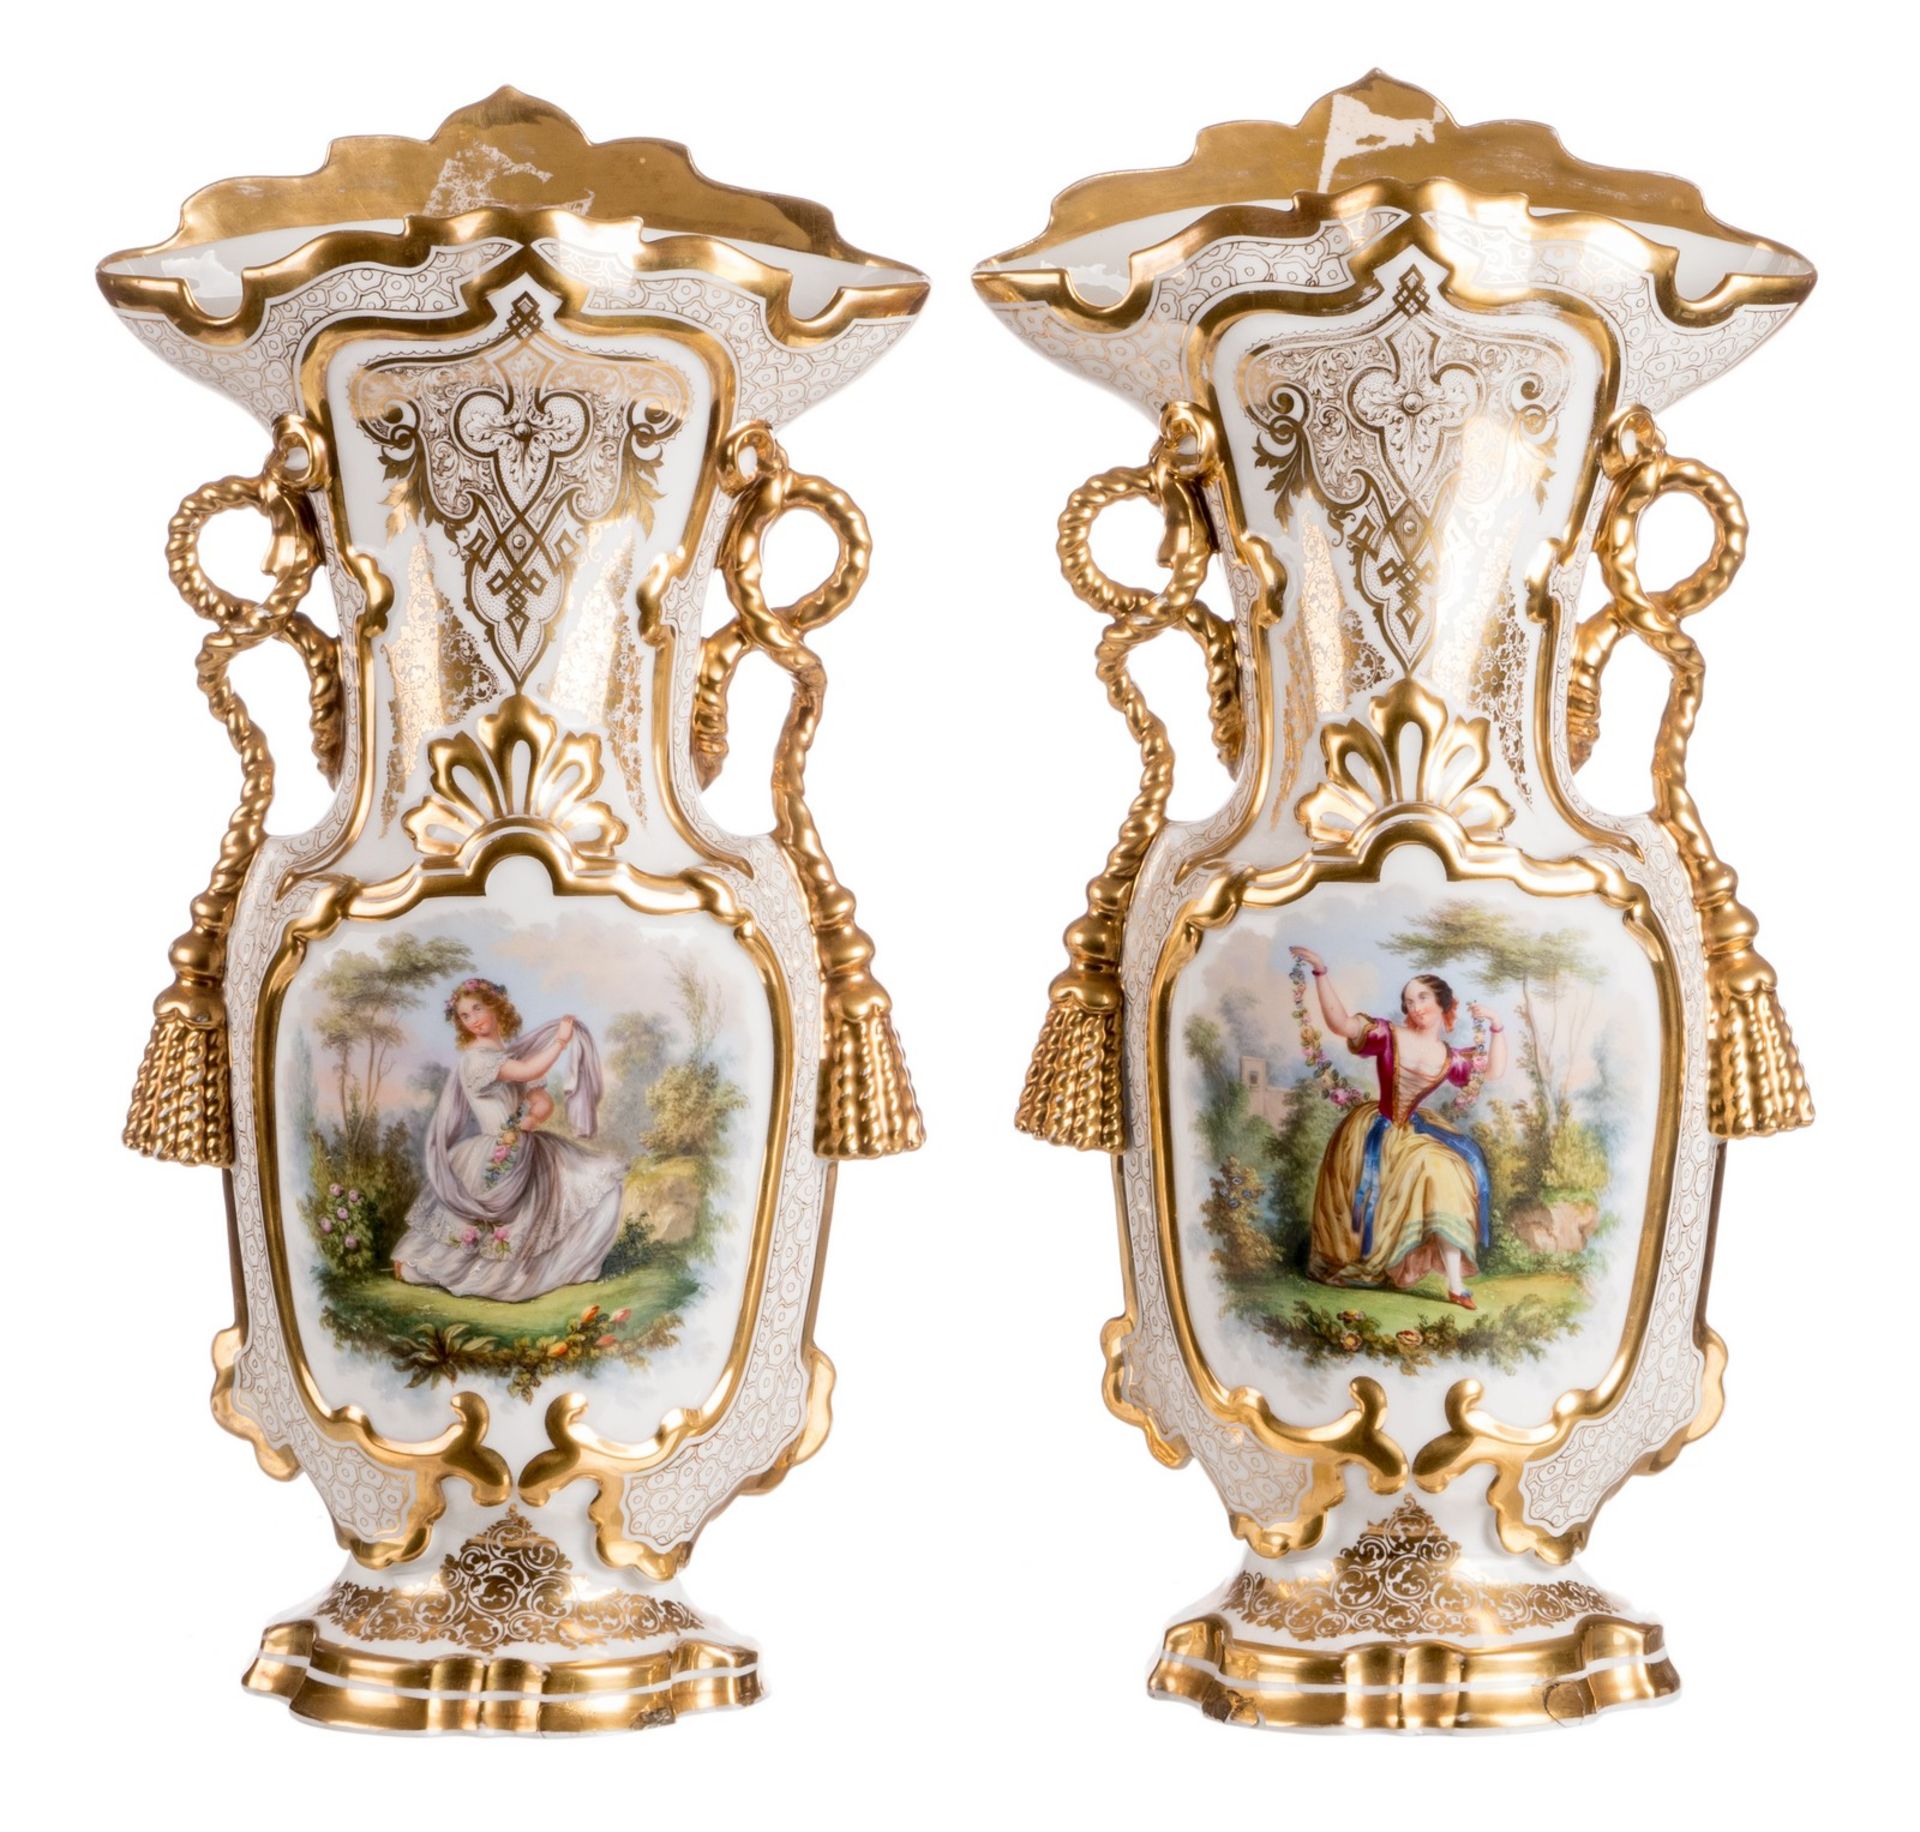 A pair of ornamental vases in Brussels porcelain depicting gallant ladies, the gold paint in good